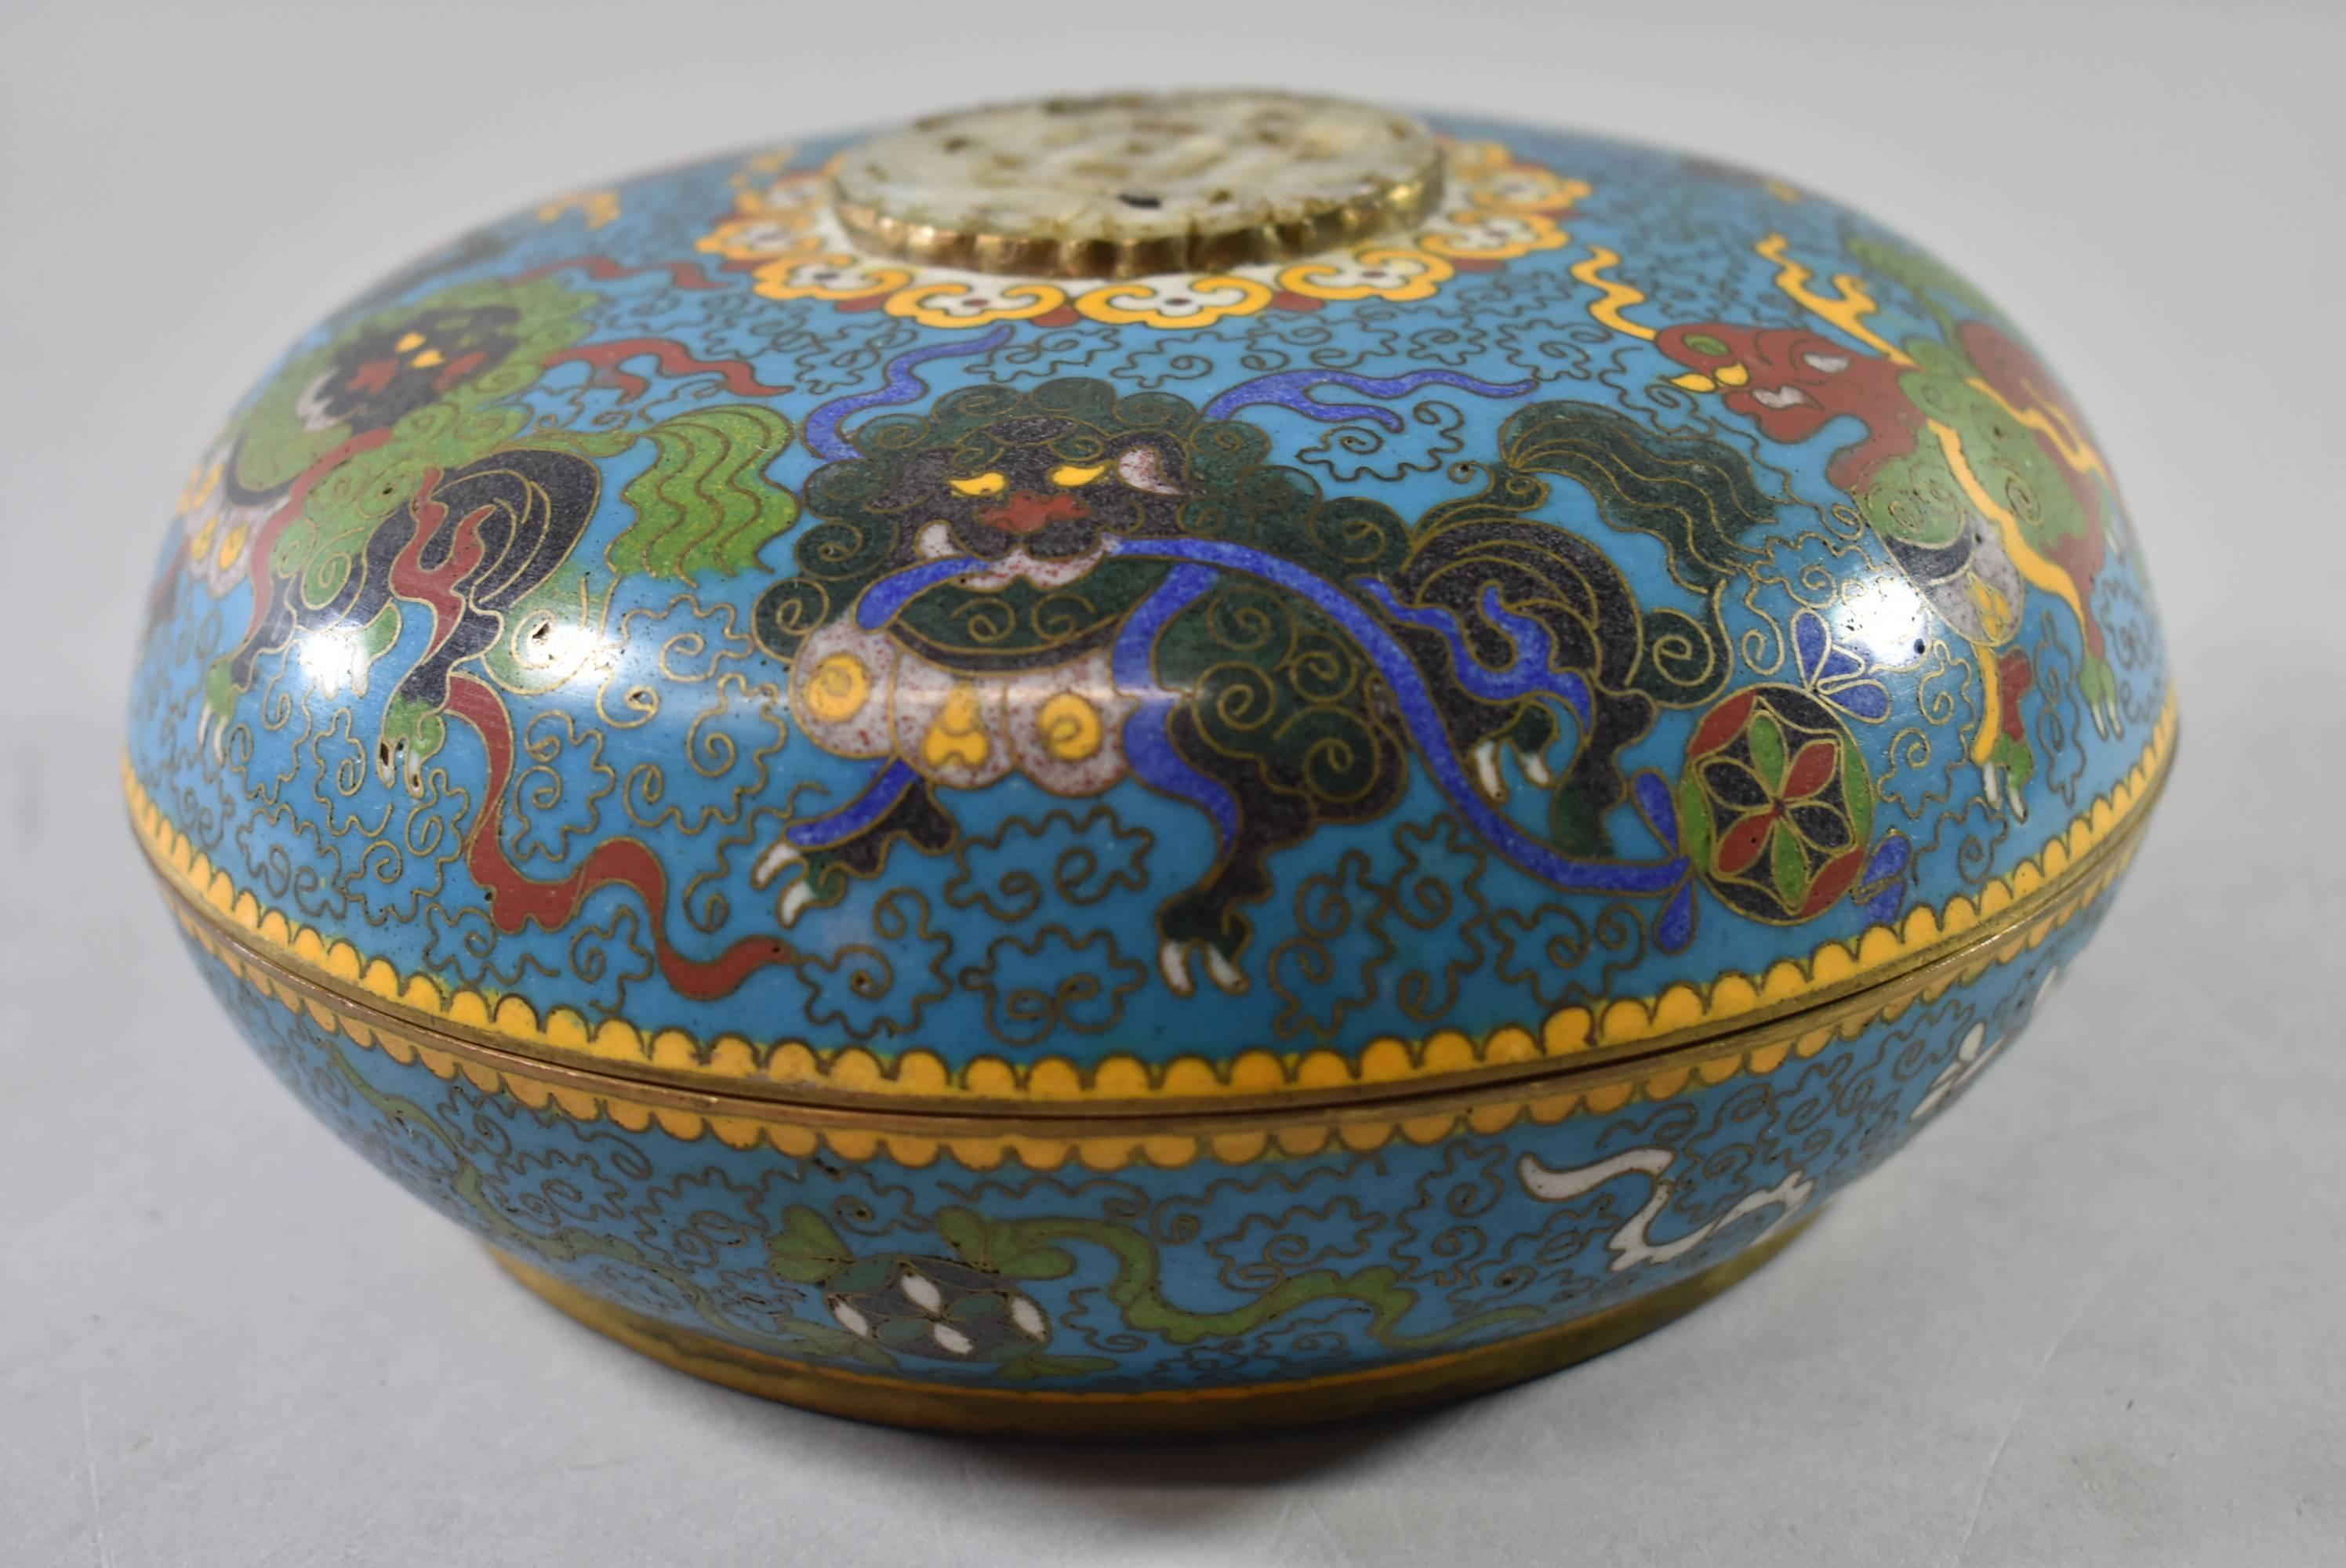 Antique Chinese cloisonne covered bowl with hand-cut white jade top medallion, very good condition with enamel work on all sides. Measures: 7 3/4